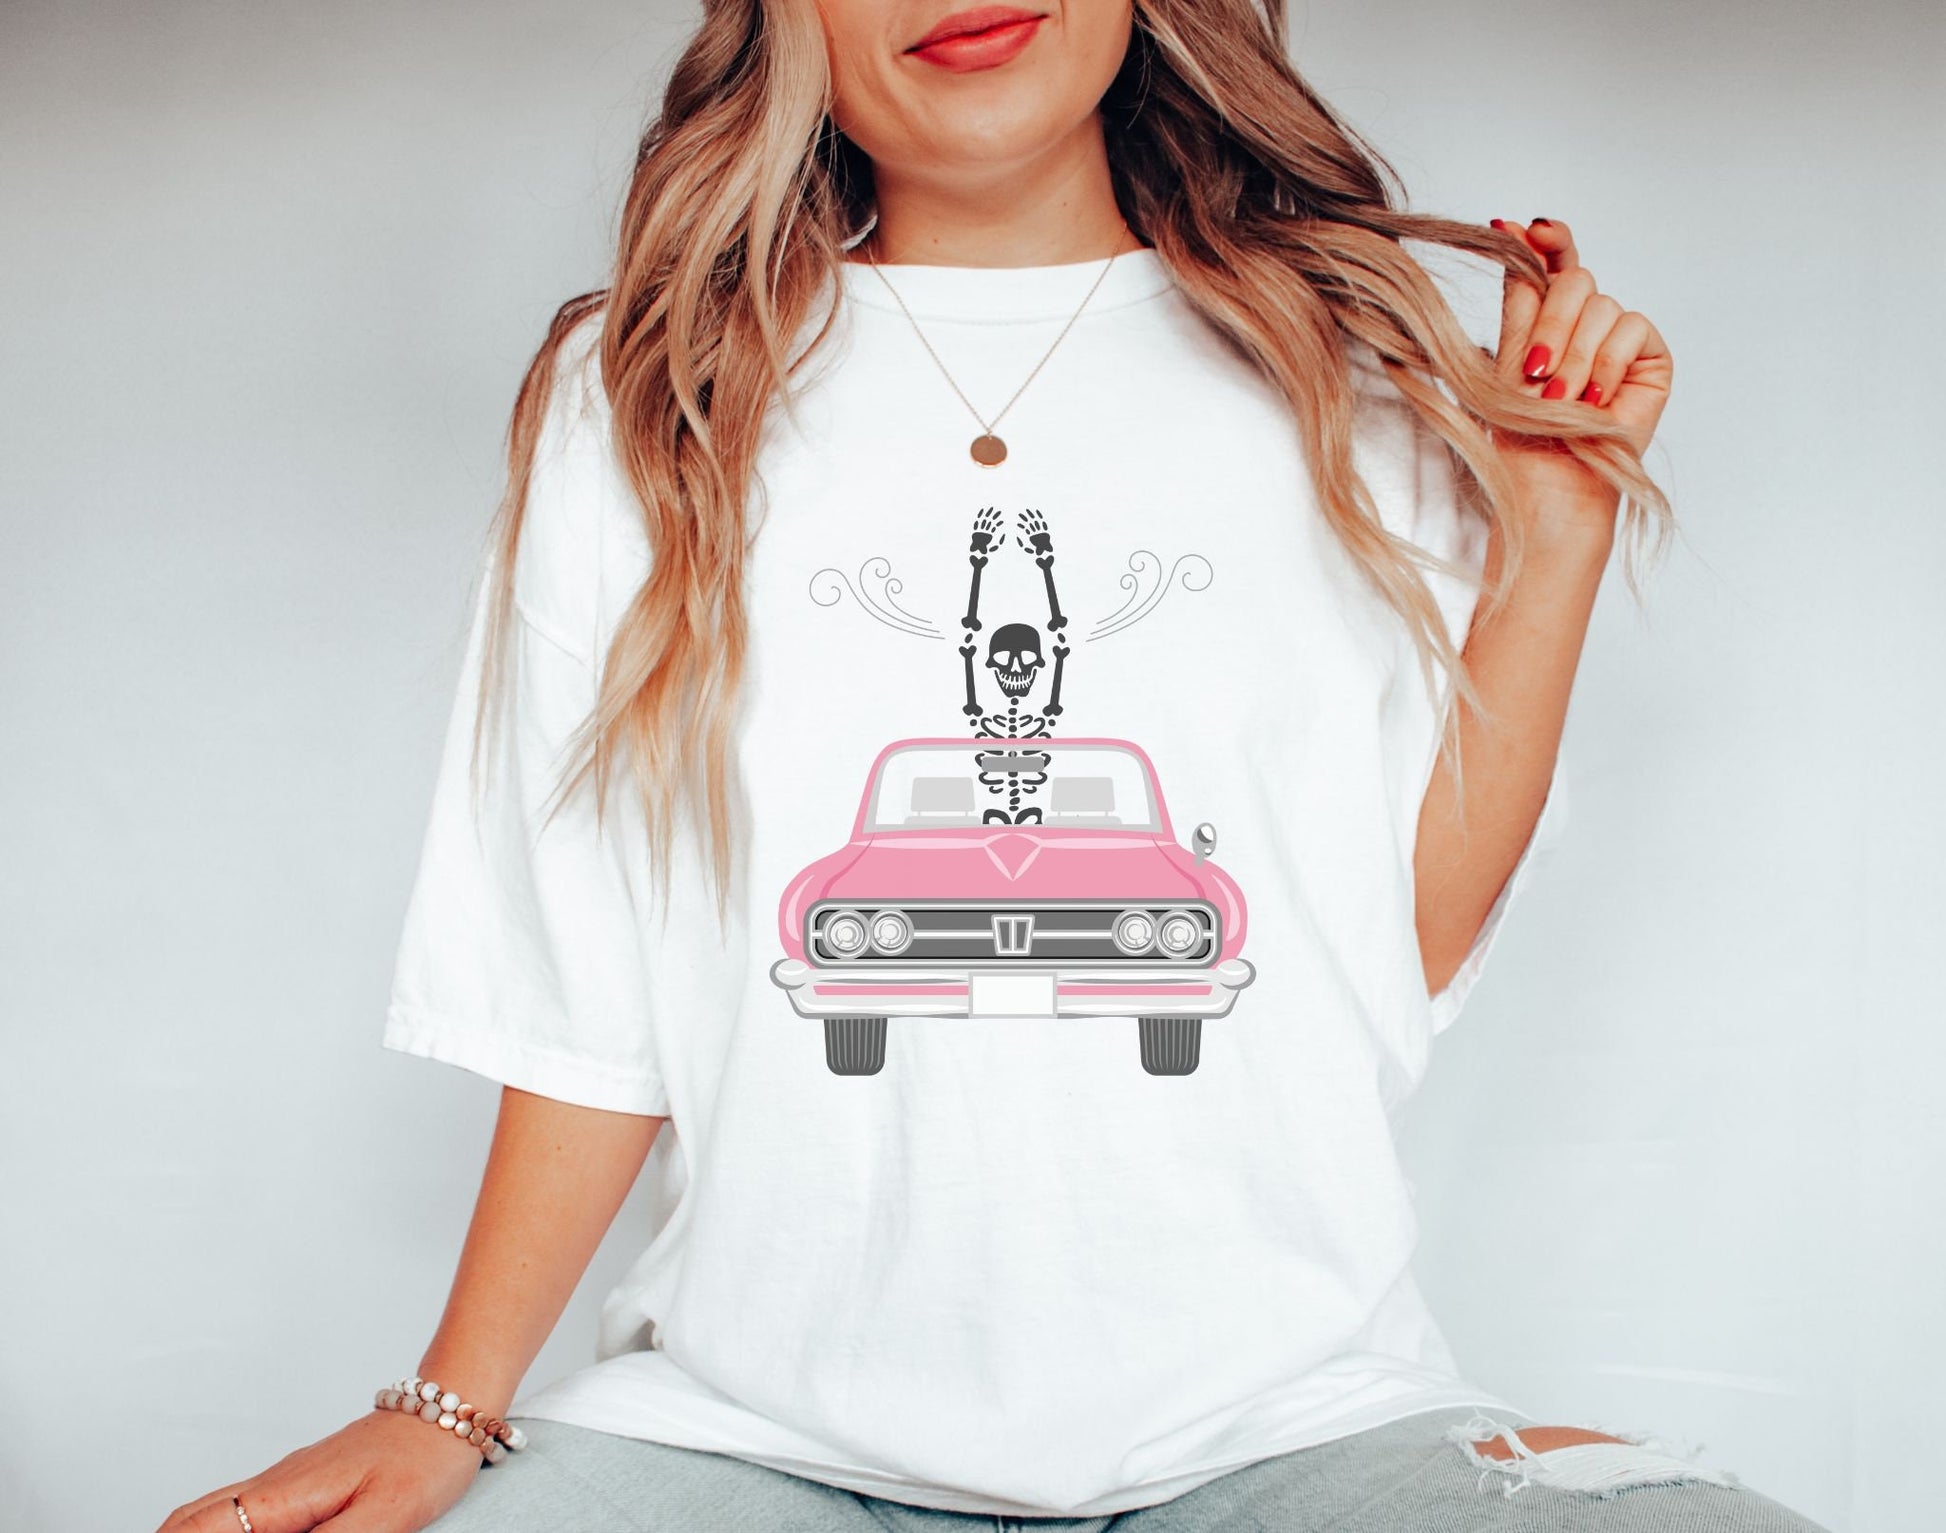 The Skeleton Spooky Wind Through the Hair Summer Shirt, Gift This Fun Shirt to Your Bestfriend